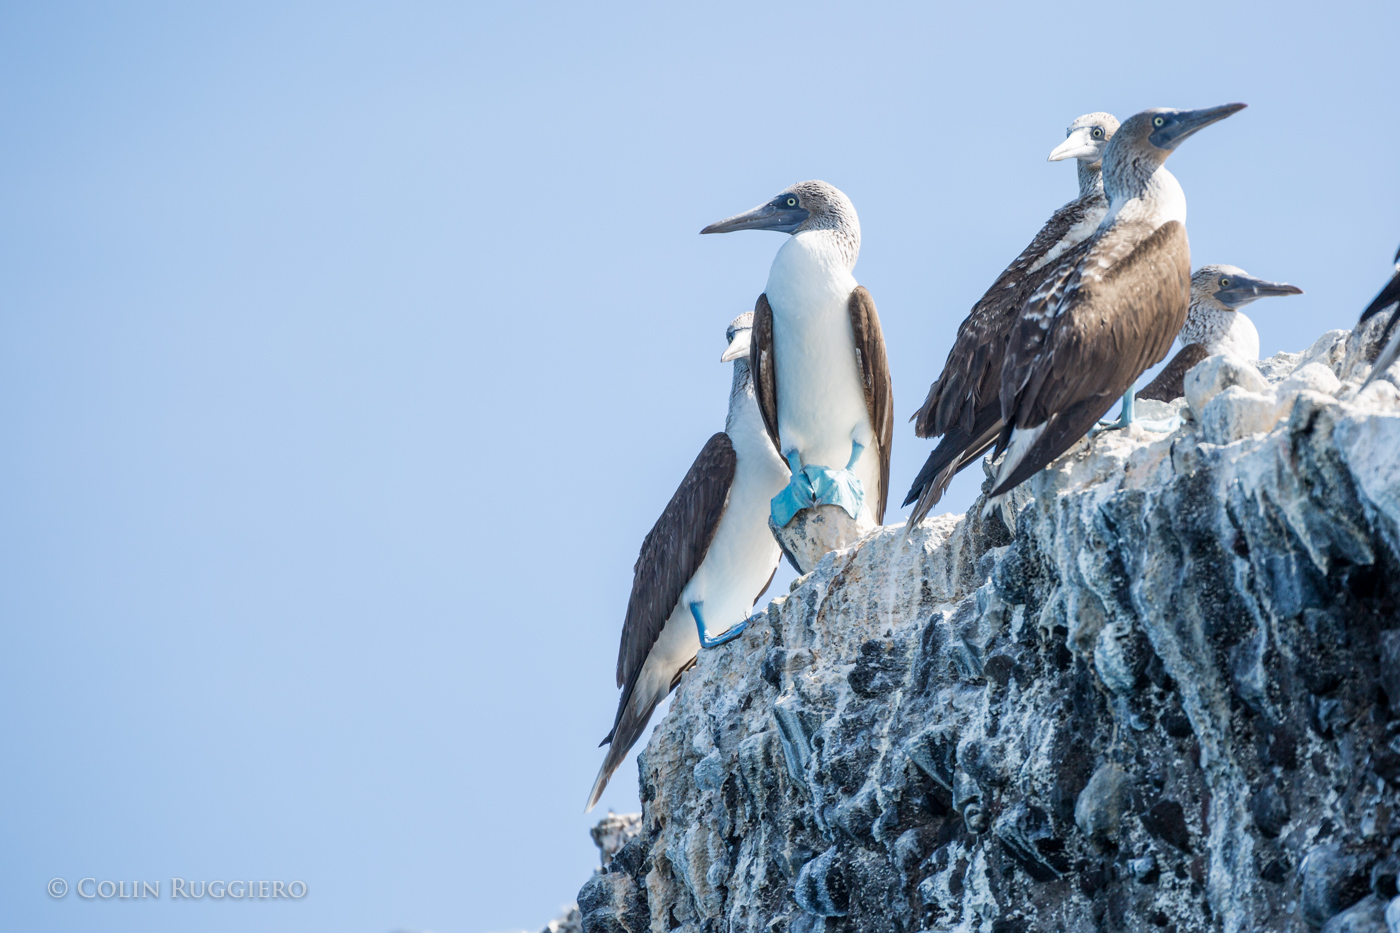 The Blue-footed Booby’s Baja Boogie